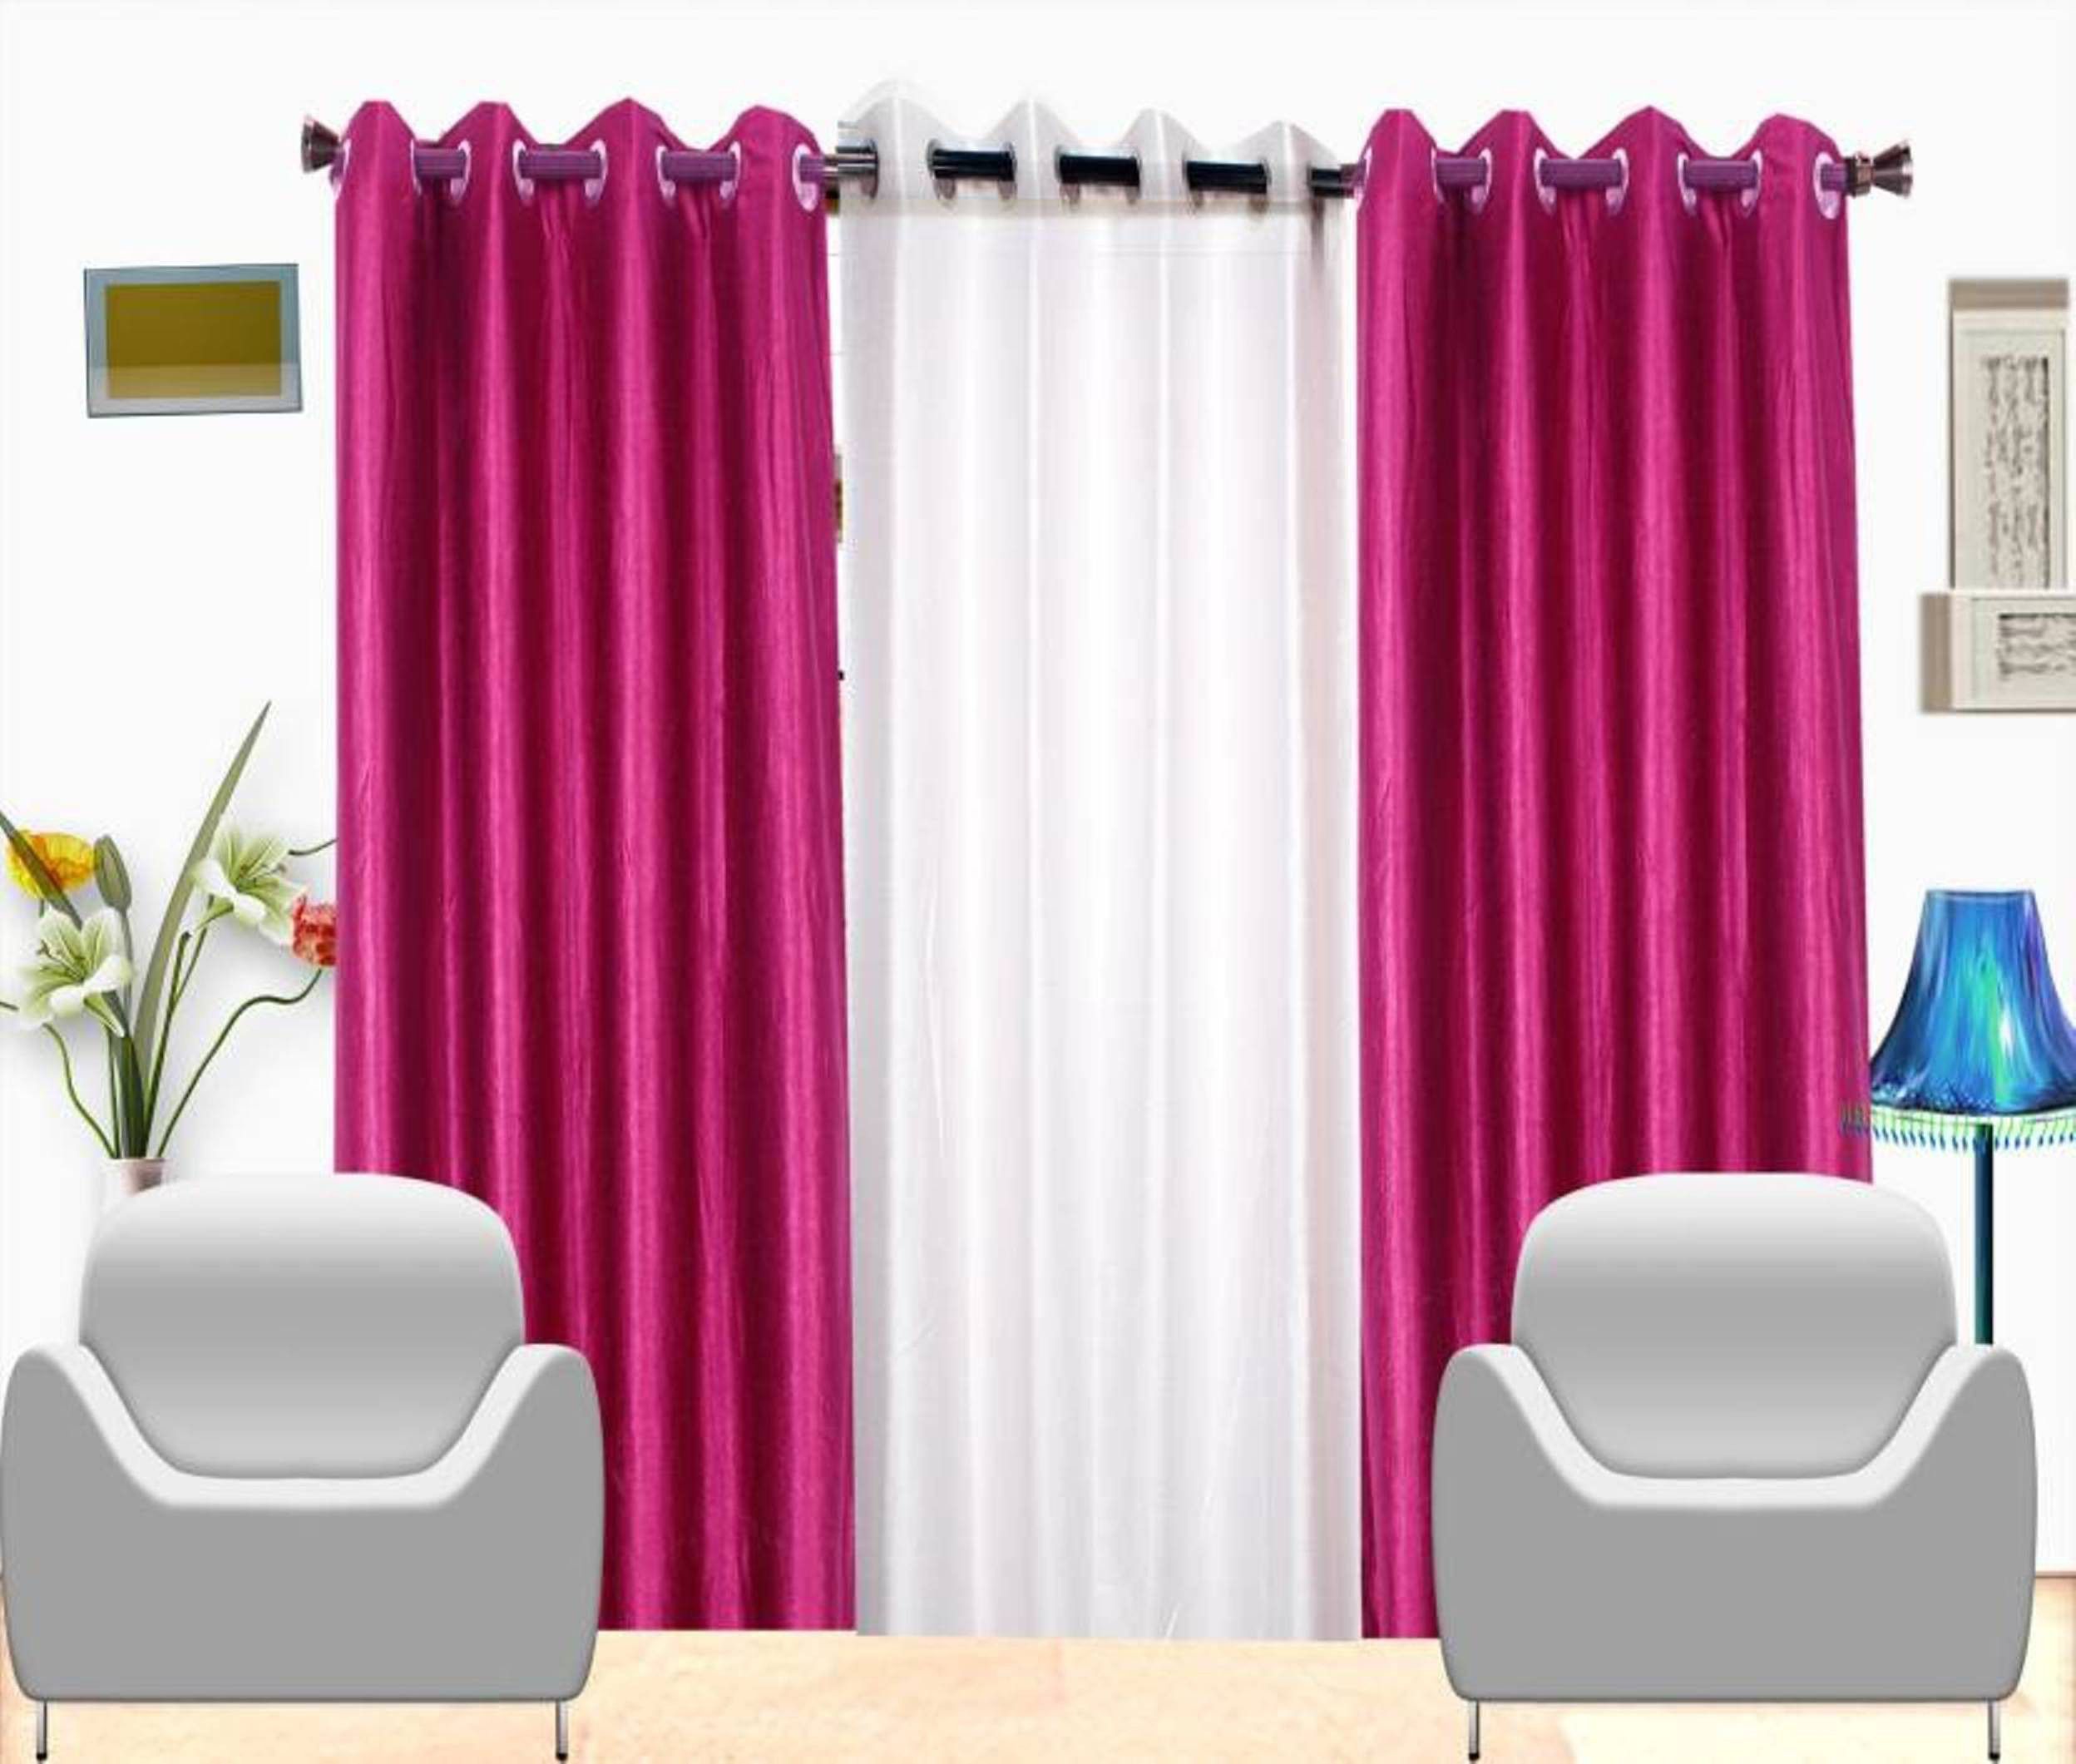     			HOMETALES Solid Semi-Transparent Eyelet Curtain 5 ft ( Pack of 3 ) - Multicolor